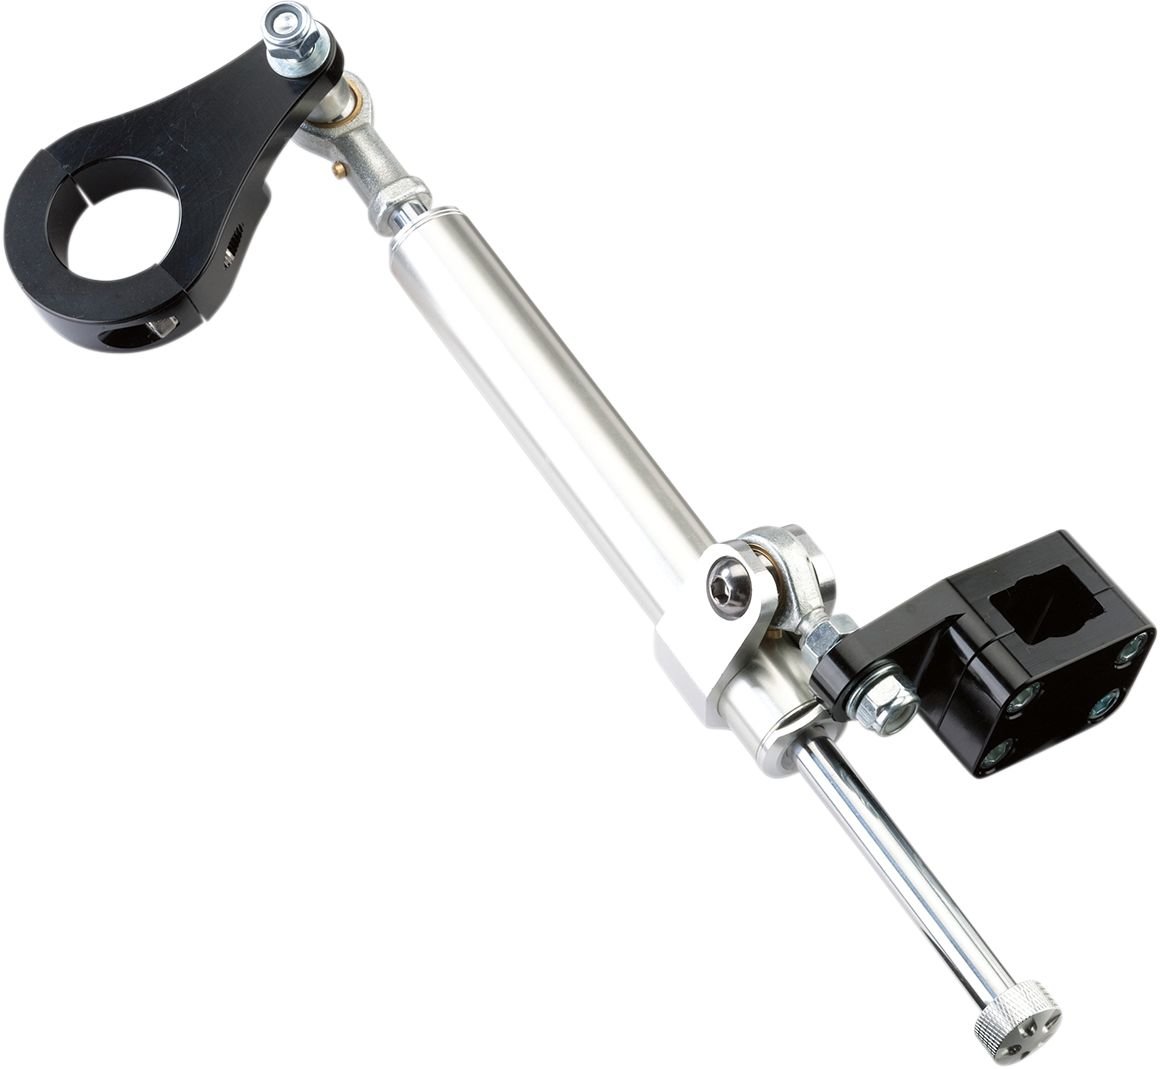 MOOSE RACING HARD-PARTS Stabilizer Steerng 7Wy Bk von Moose Racing Hard-Parts